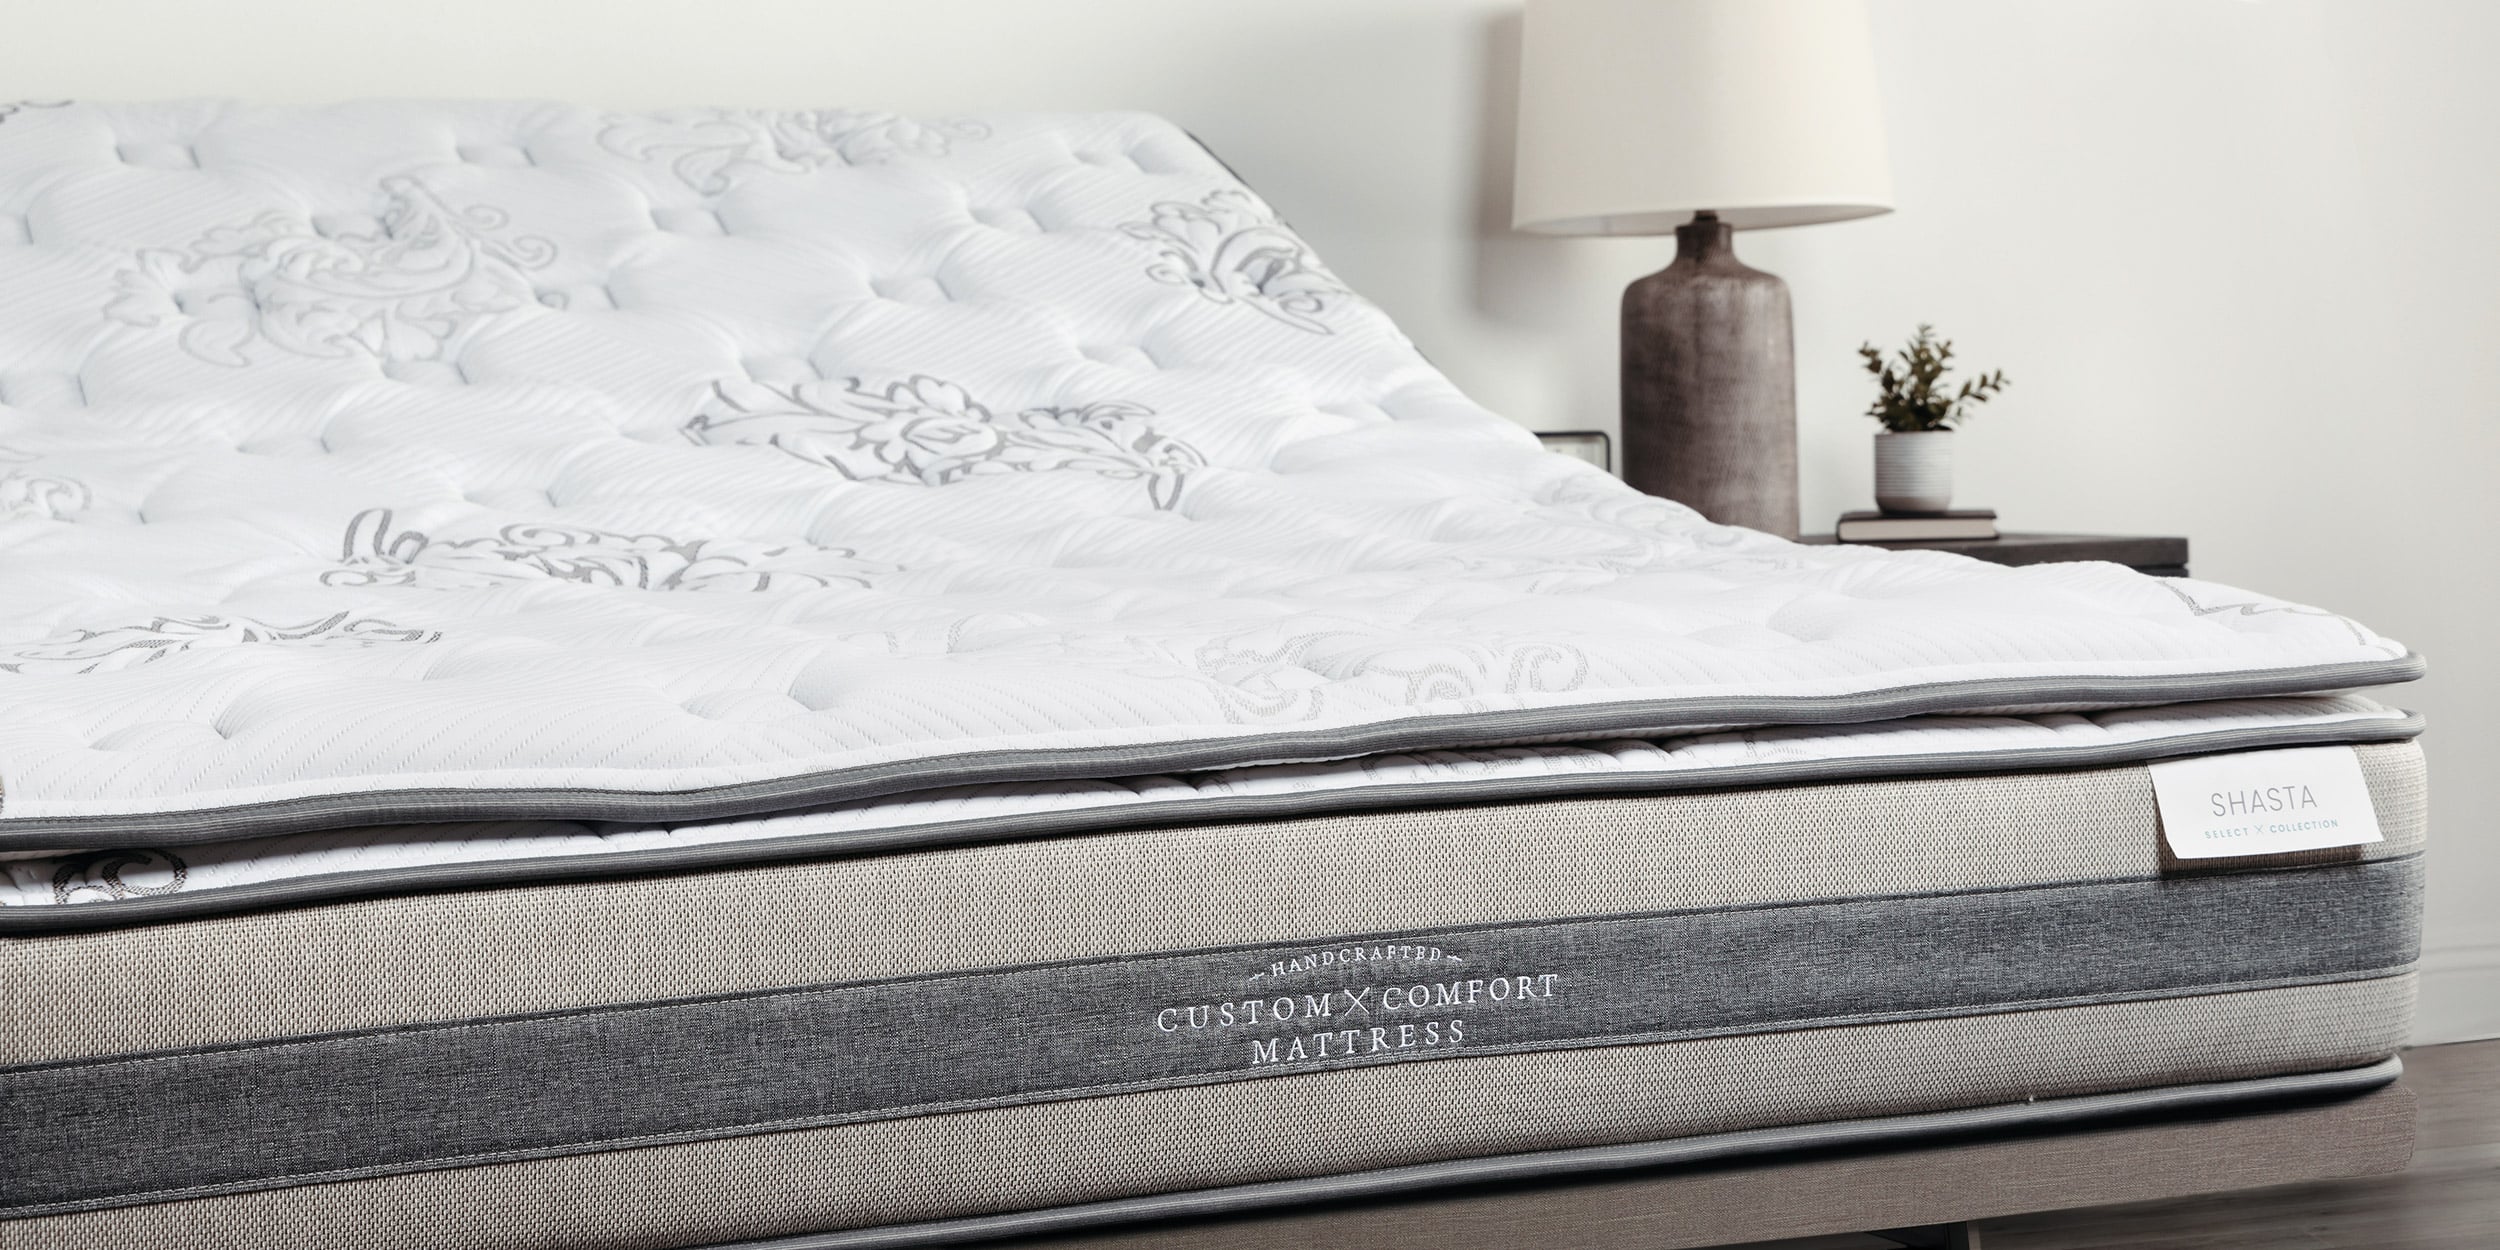 Superior Sleep Experience – Committed to providing the best comfort and  sleep possible on adjustable beds and quality sheets and bedding